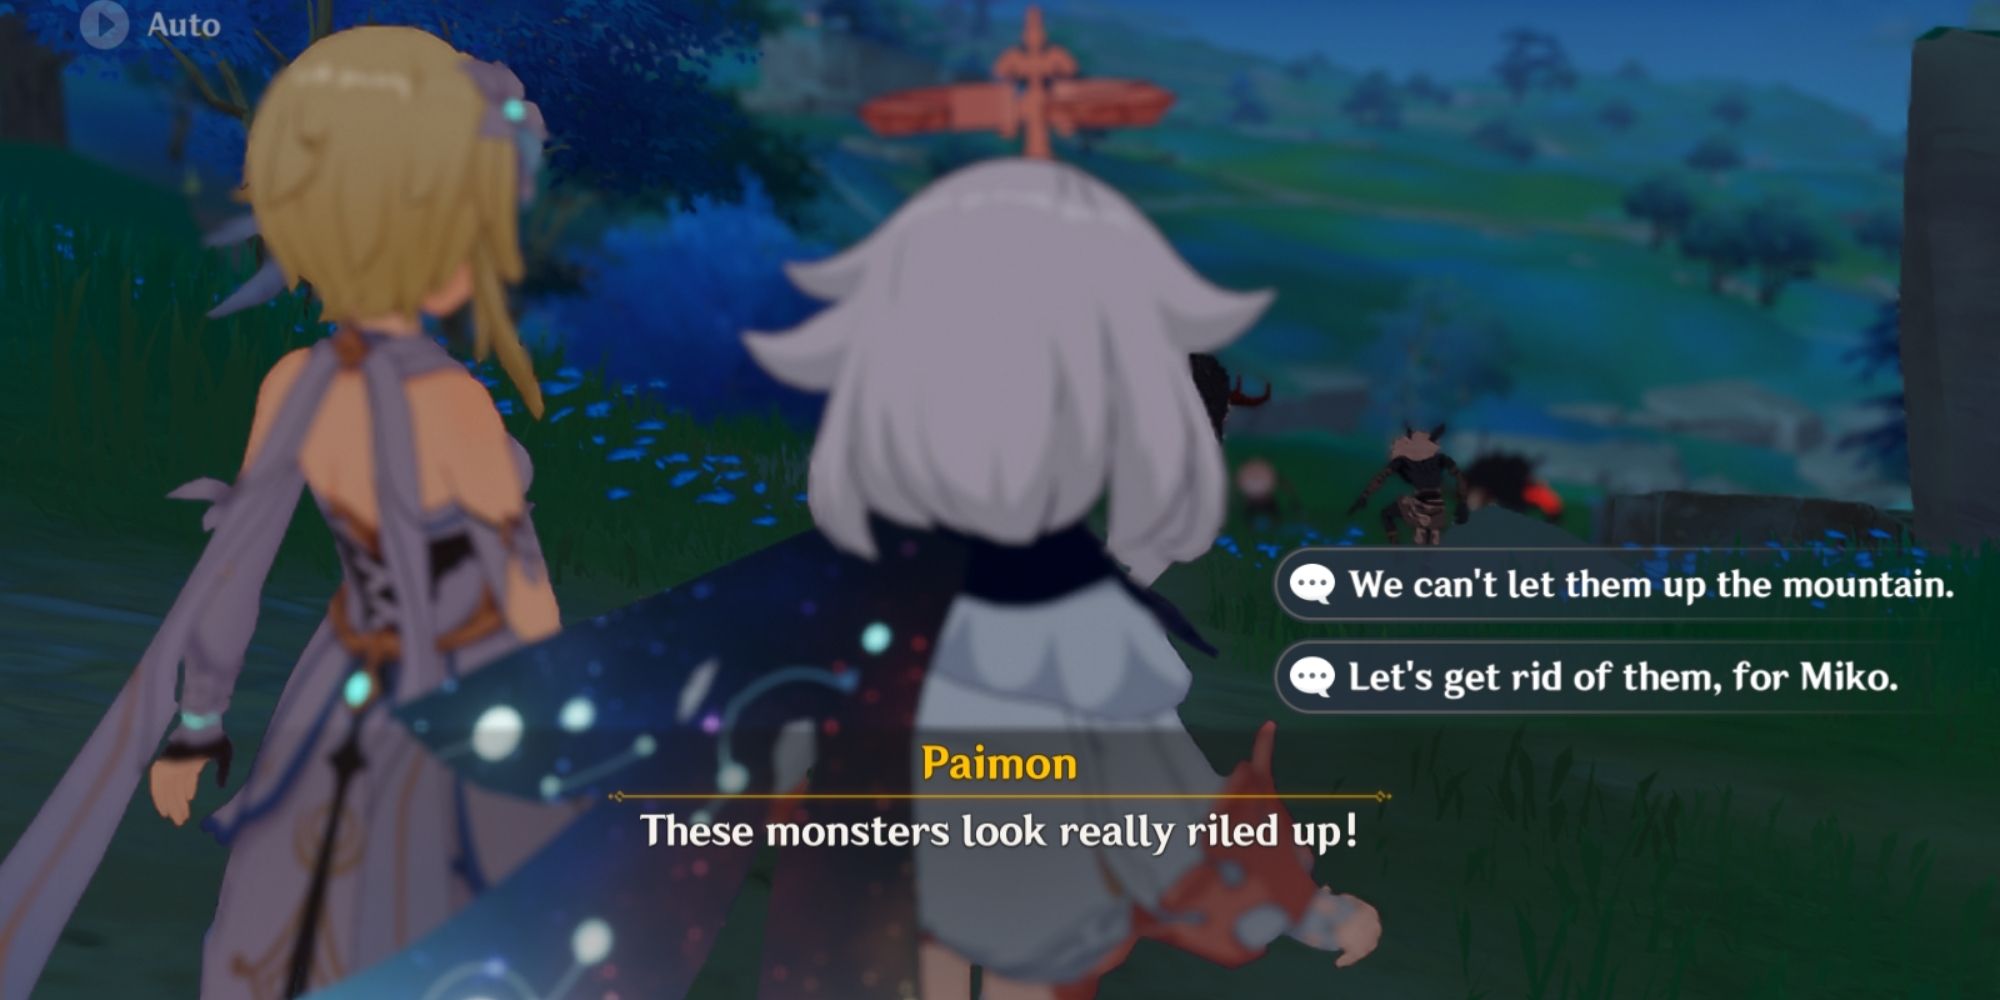 Lumine and Paimon seeing monsters